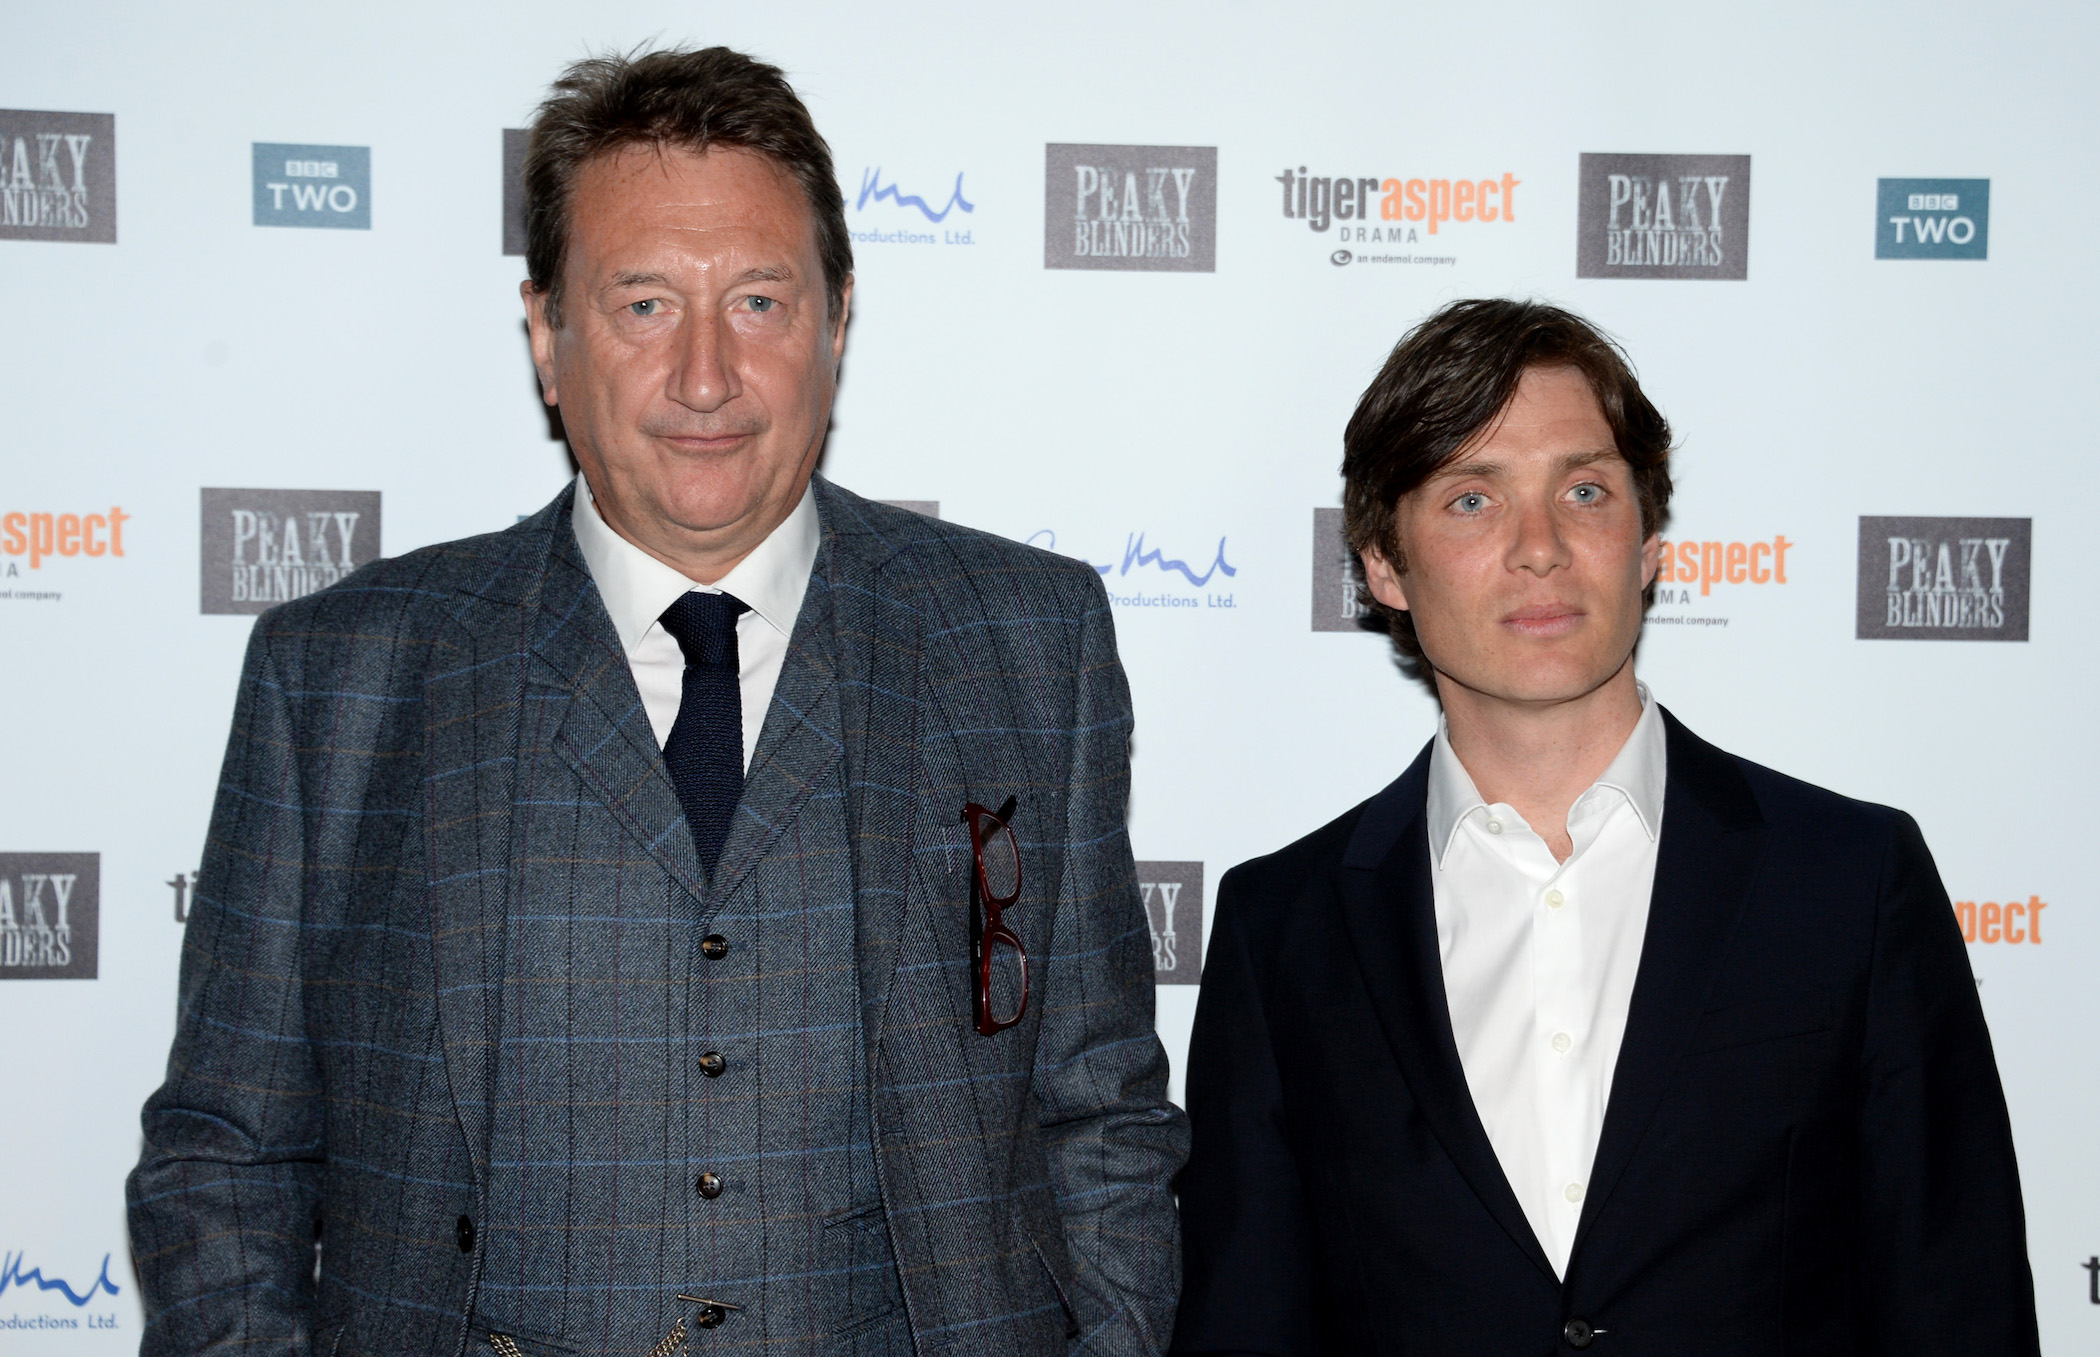 'Peaky Blinders' Season 6 creator Steven Knight and Thomas Shelby actor Cillian Murphy standing next to each other in suits